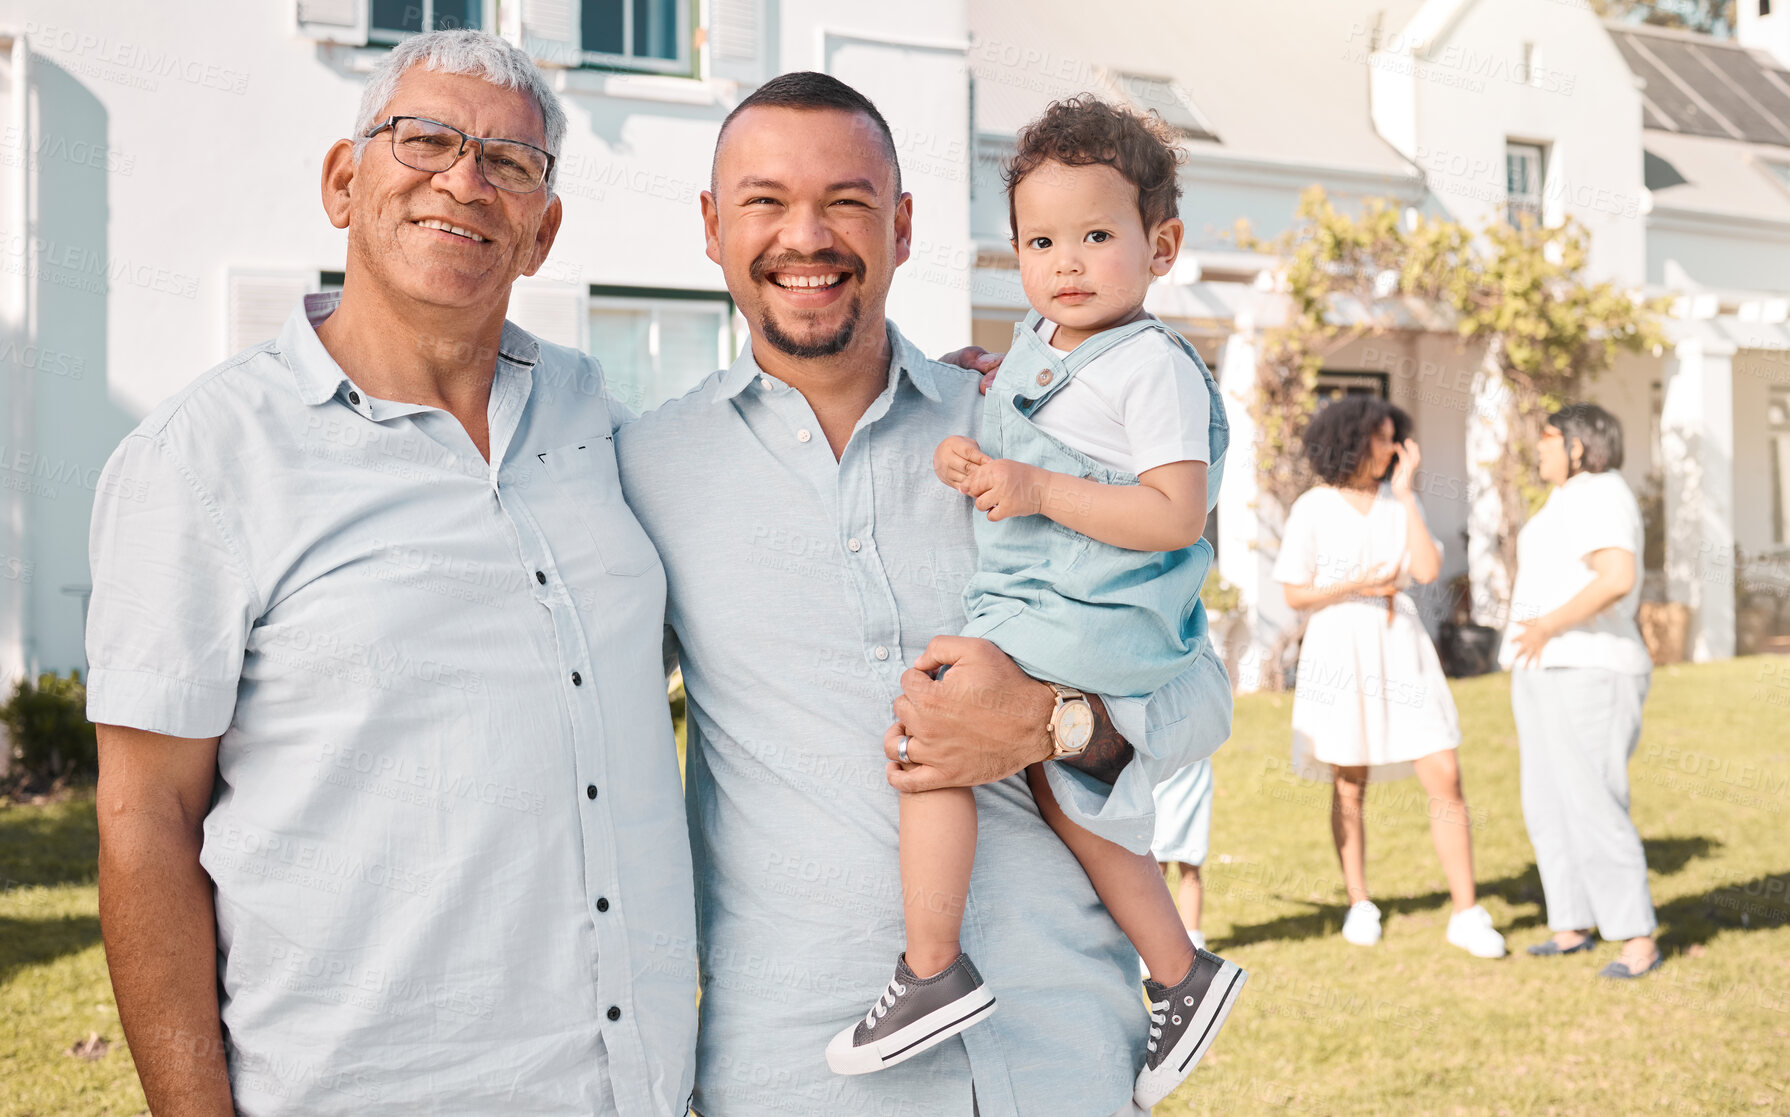 Buy stock photo Dad, grandfather or portrait of child in new home or real estate as a happy family with love or care. House, garden or senior grandparent with a happy man or young boy kid with a smile on a property